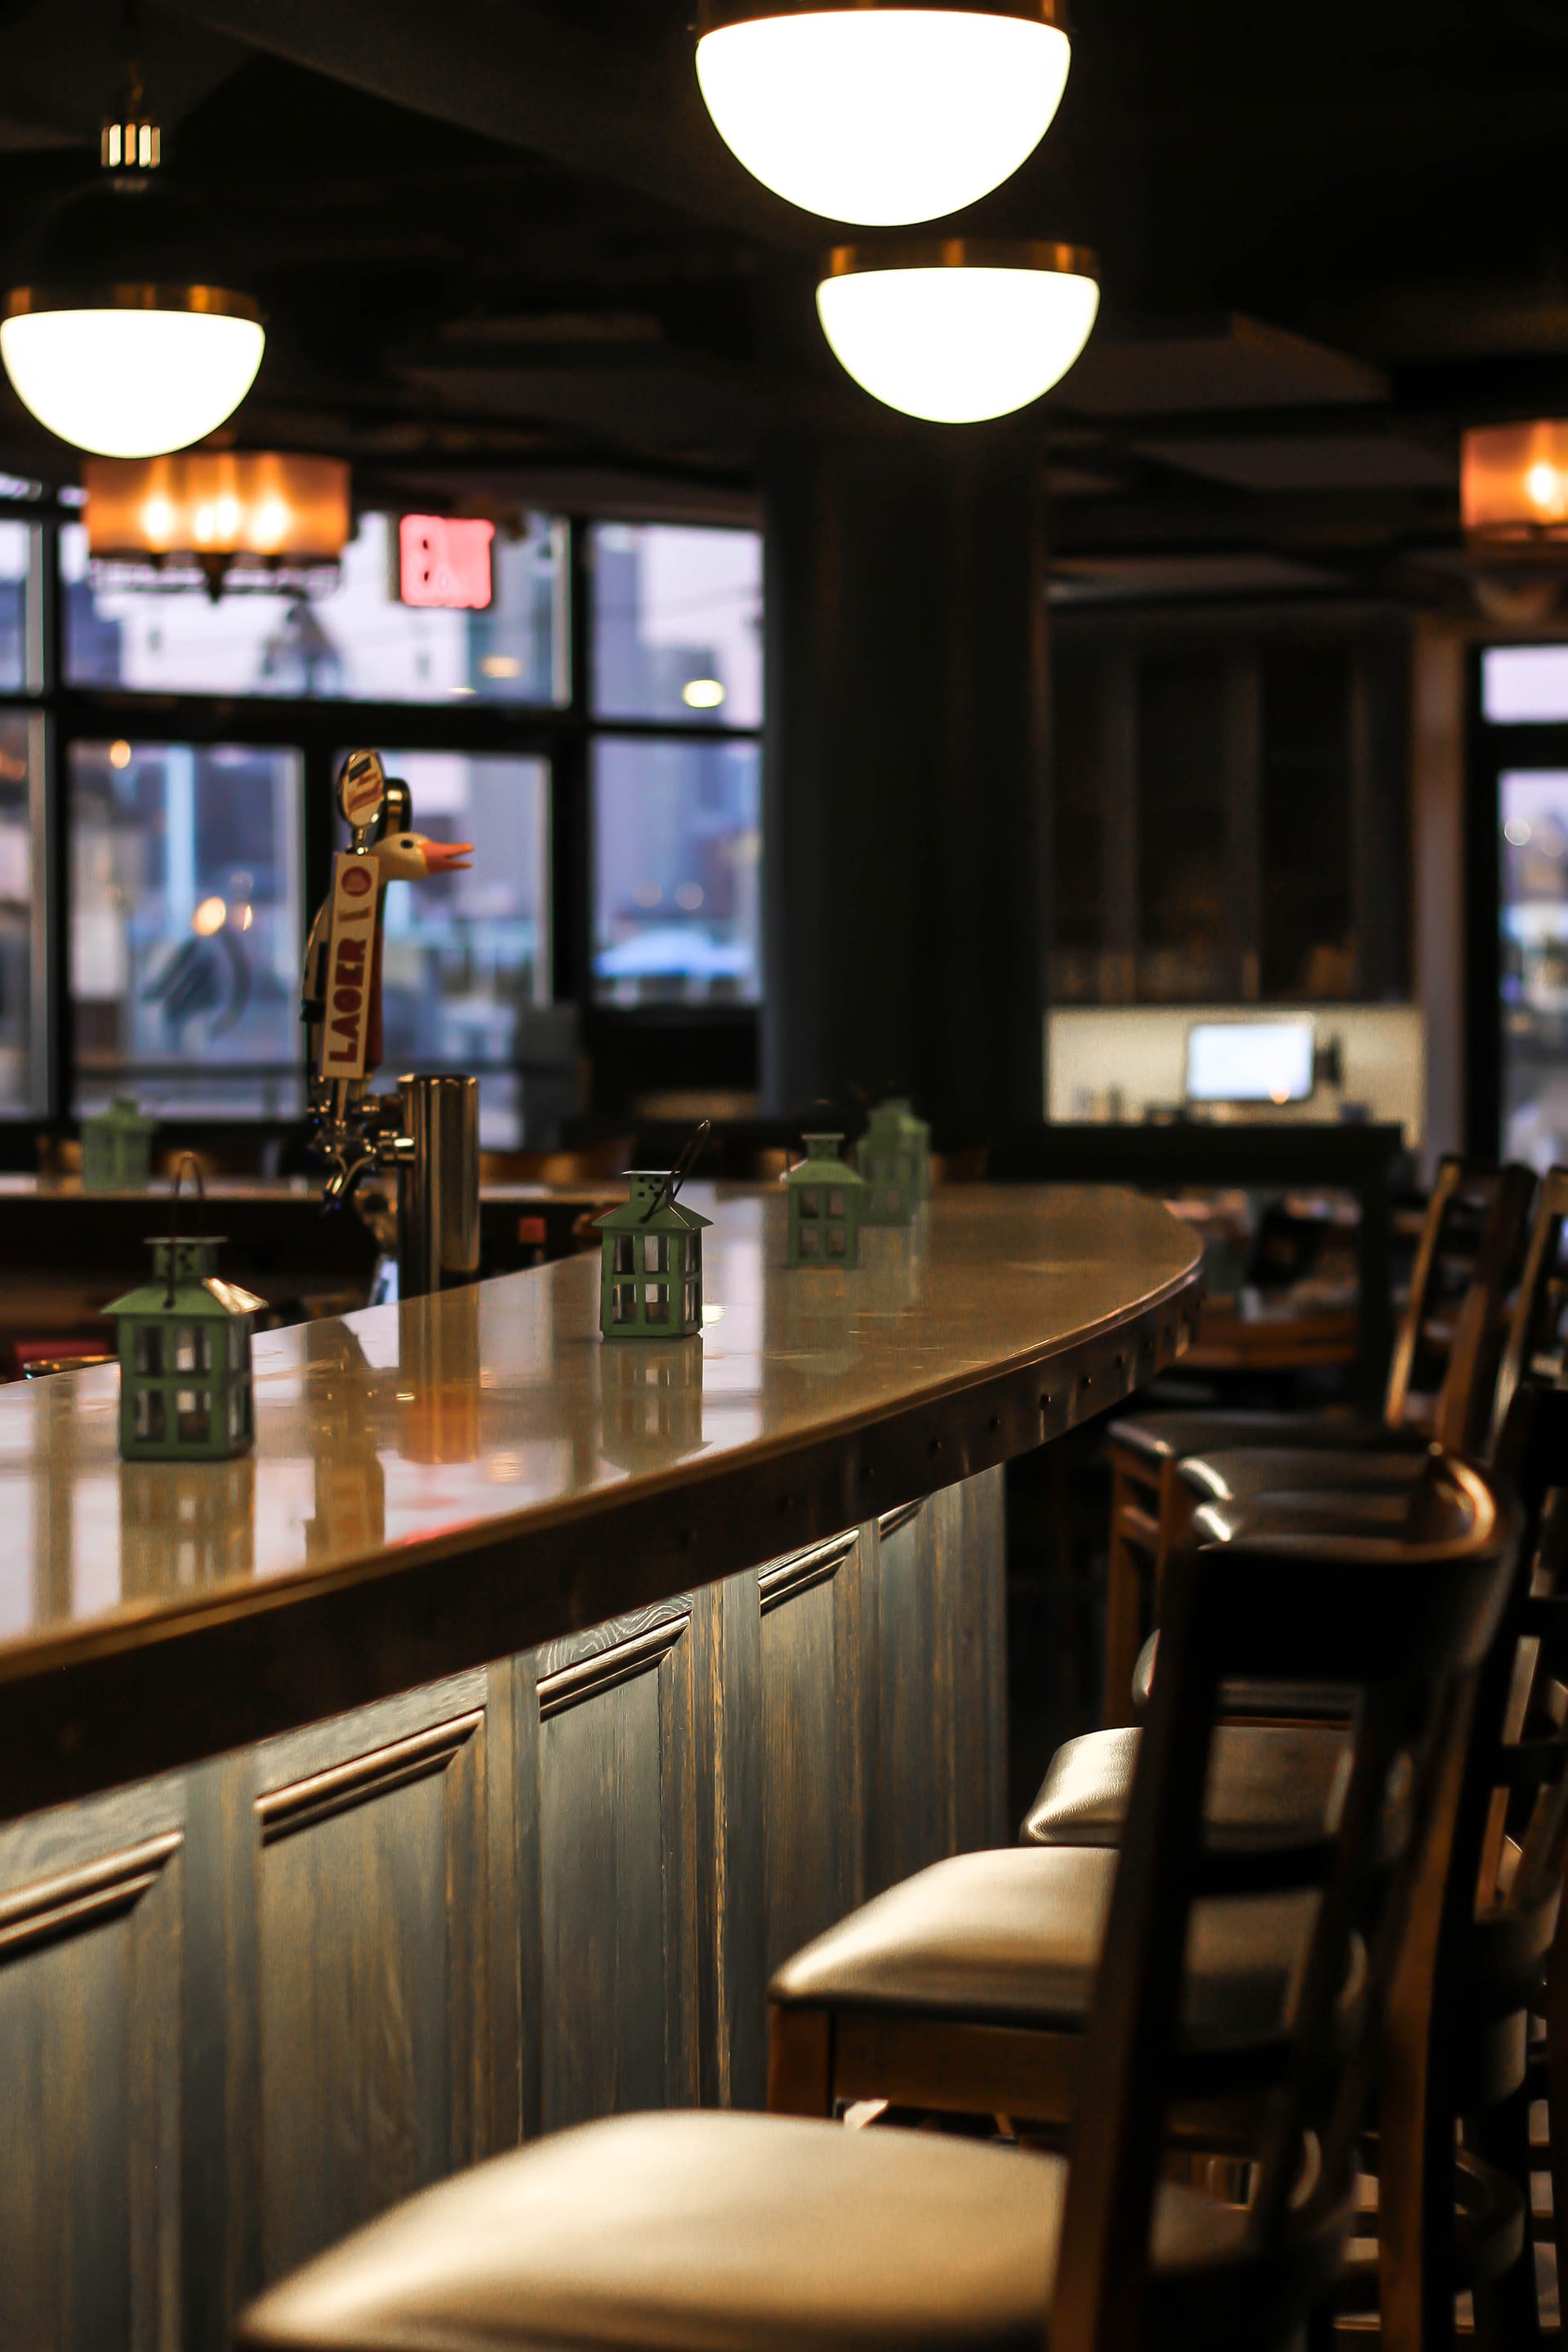 A row of barstools in front of a bar with green lanterns on top and alcove lighting underneath the bar.